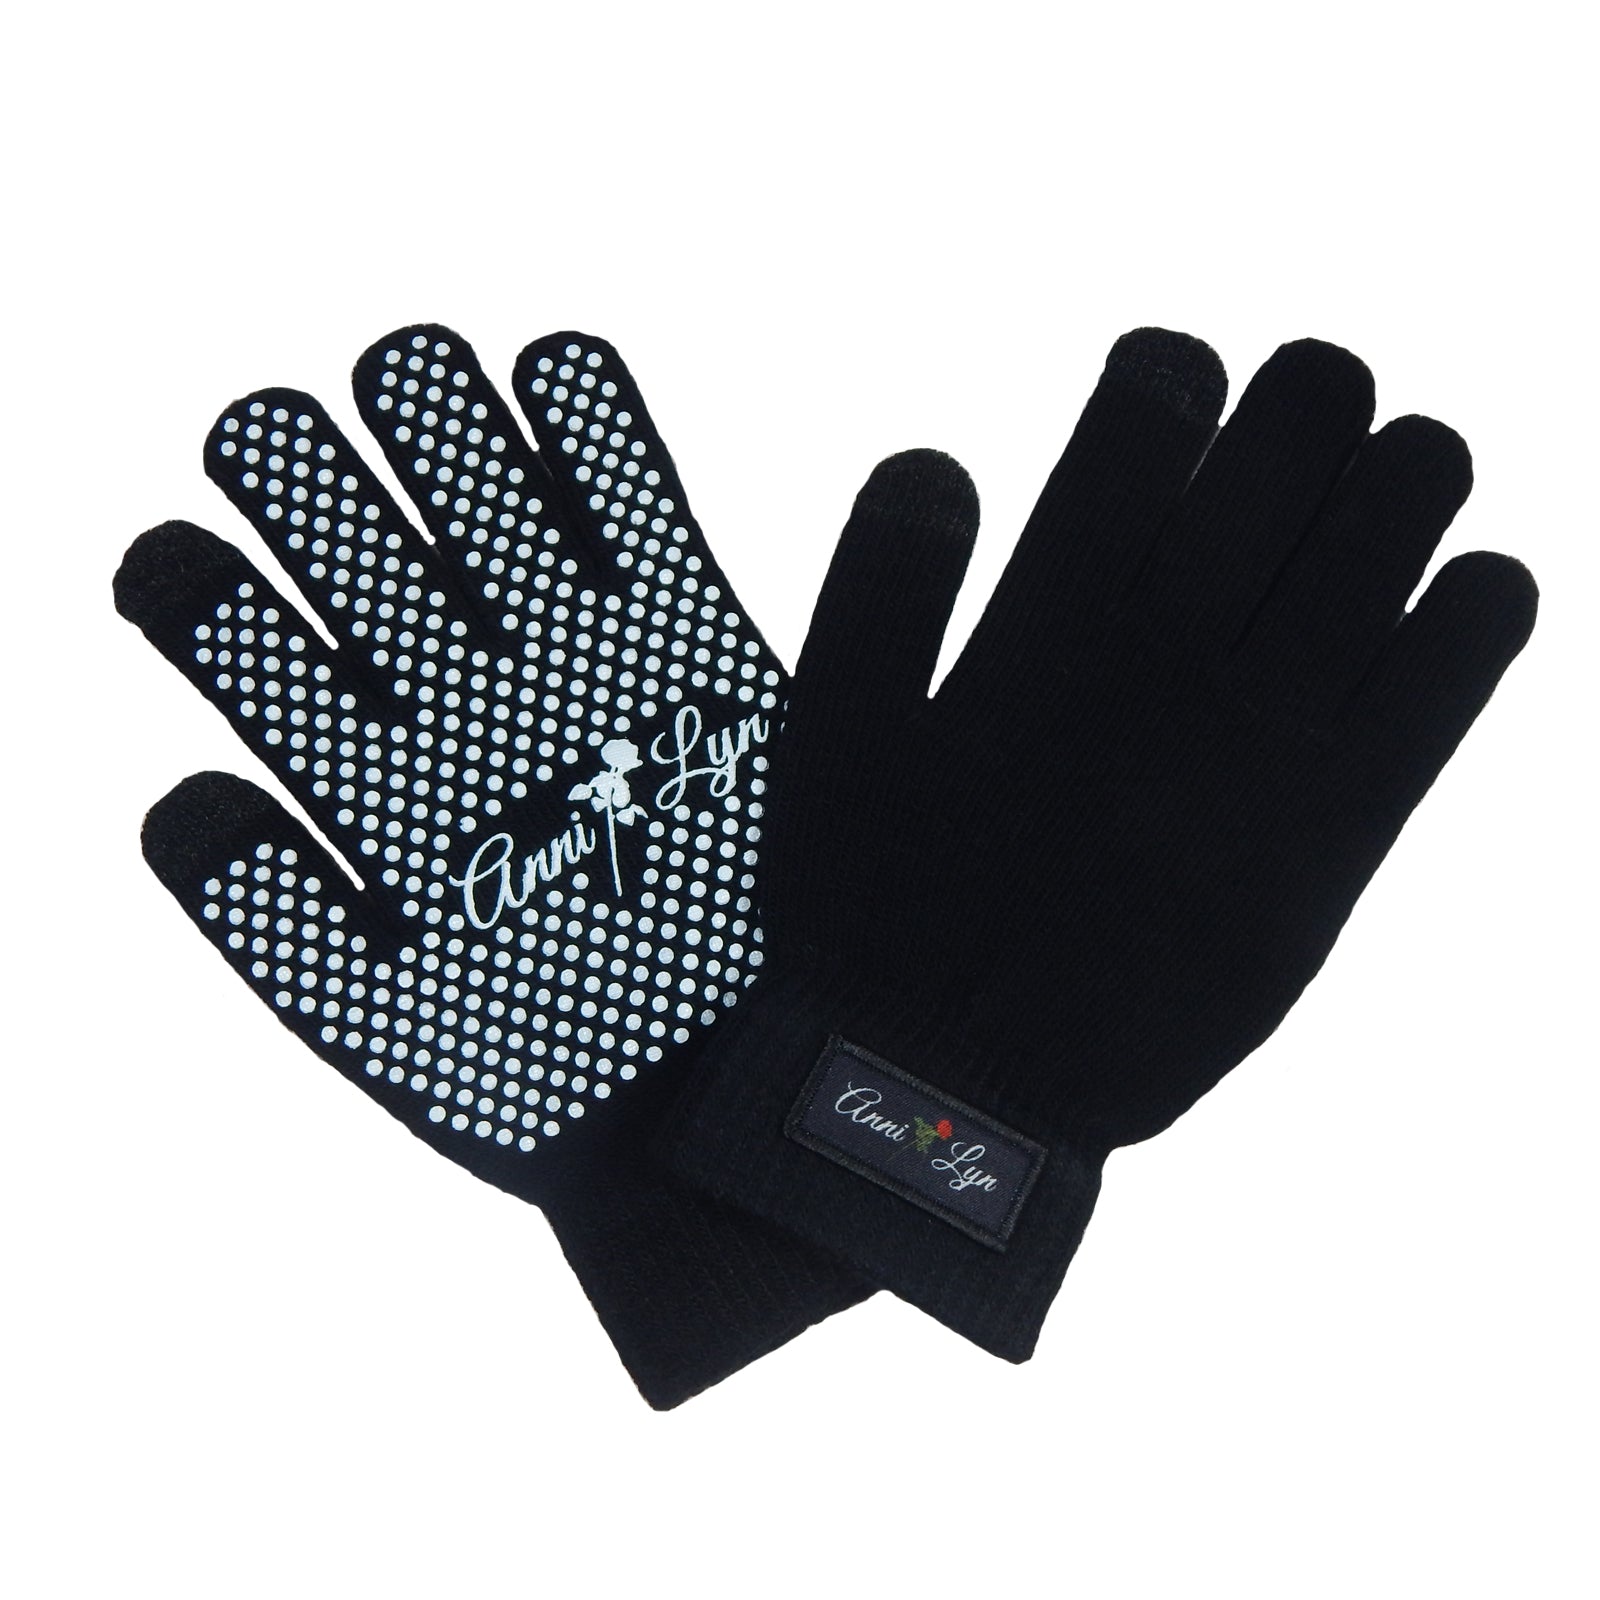 Anni Lyn Sportswear Winter Knit Gloves with Silicone Grip